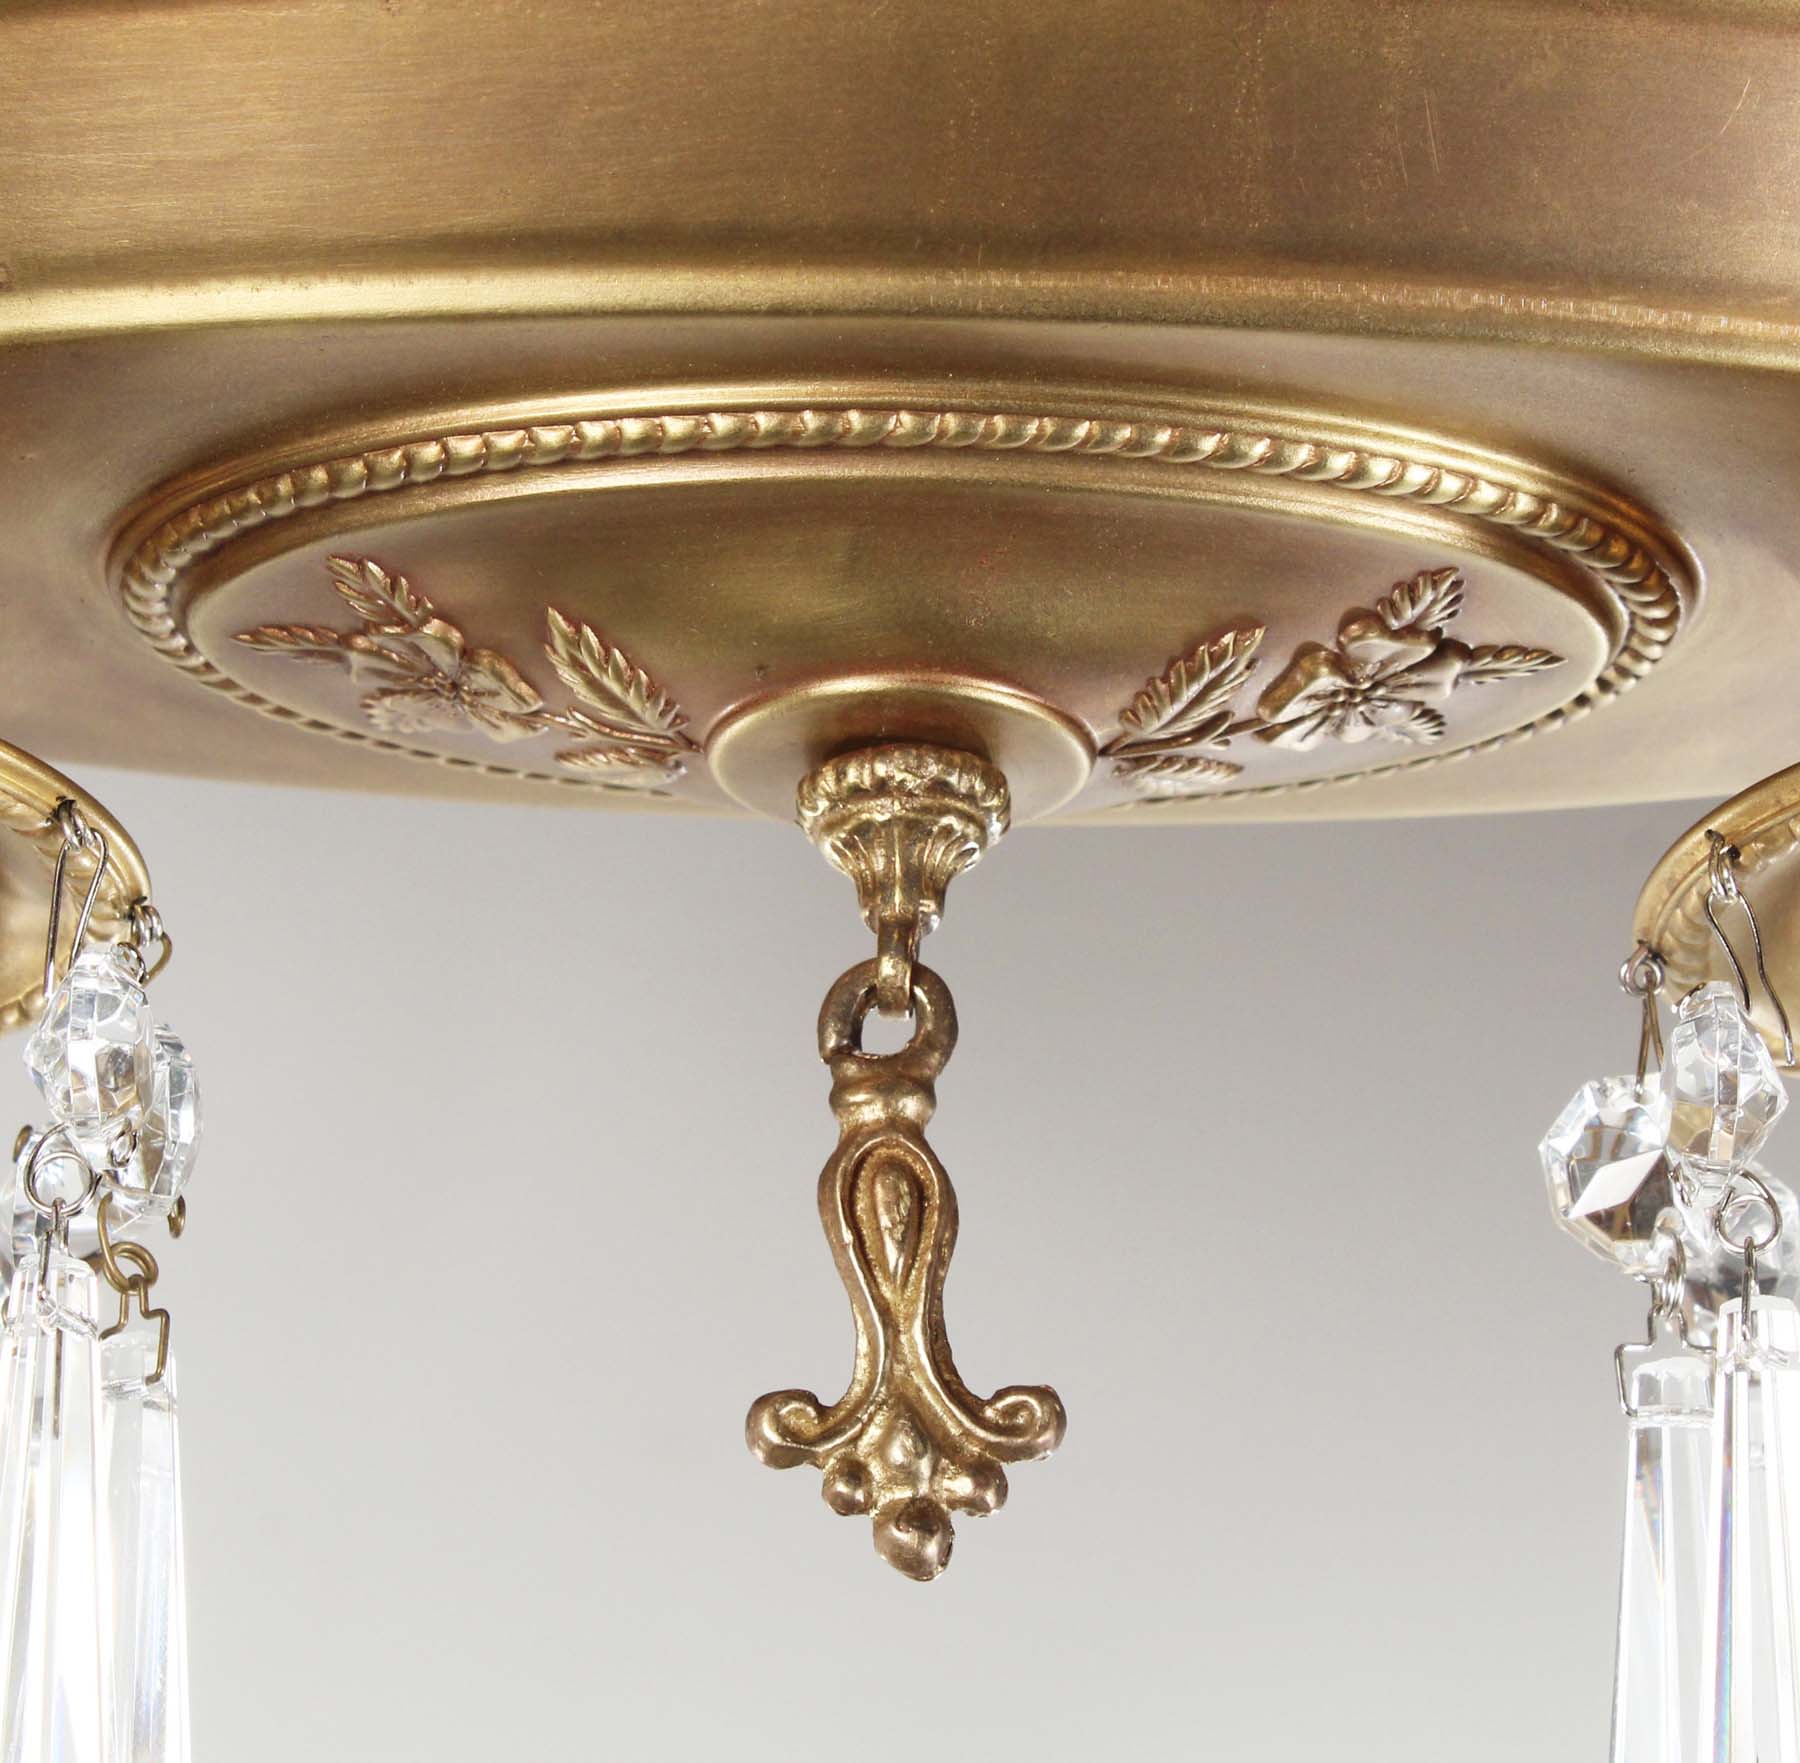 SOLD Antique Neoclassical Flush Mount Fixtures, Icicle Prisms-68407